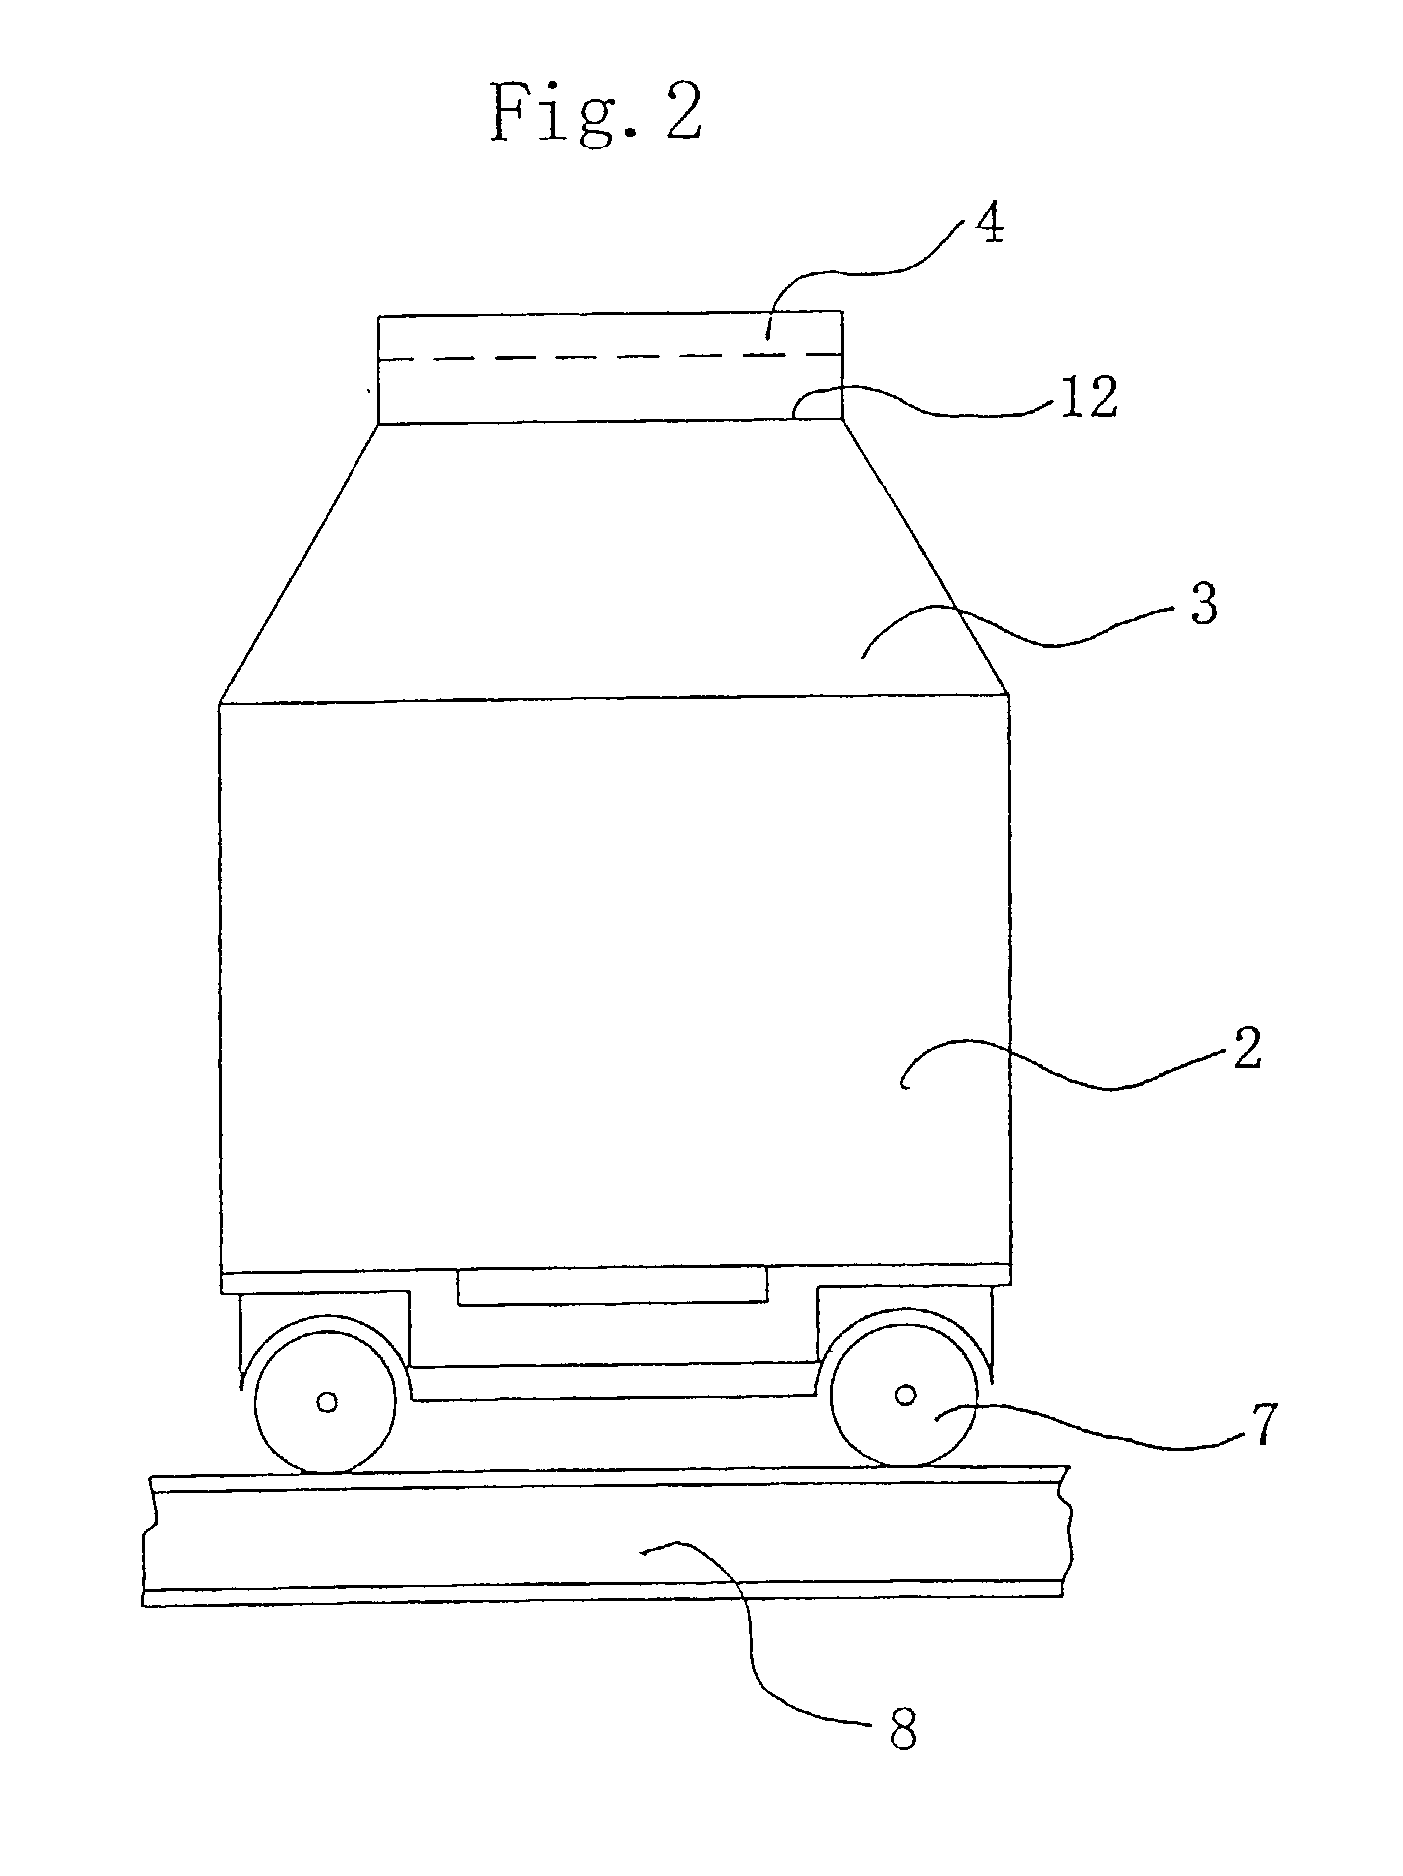 Container inspection apparatus